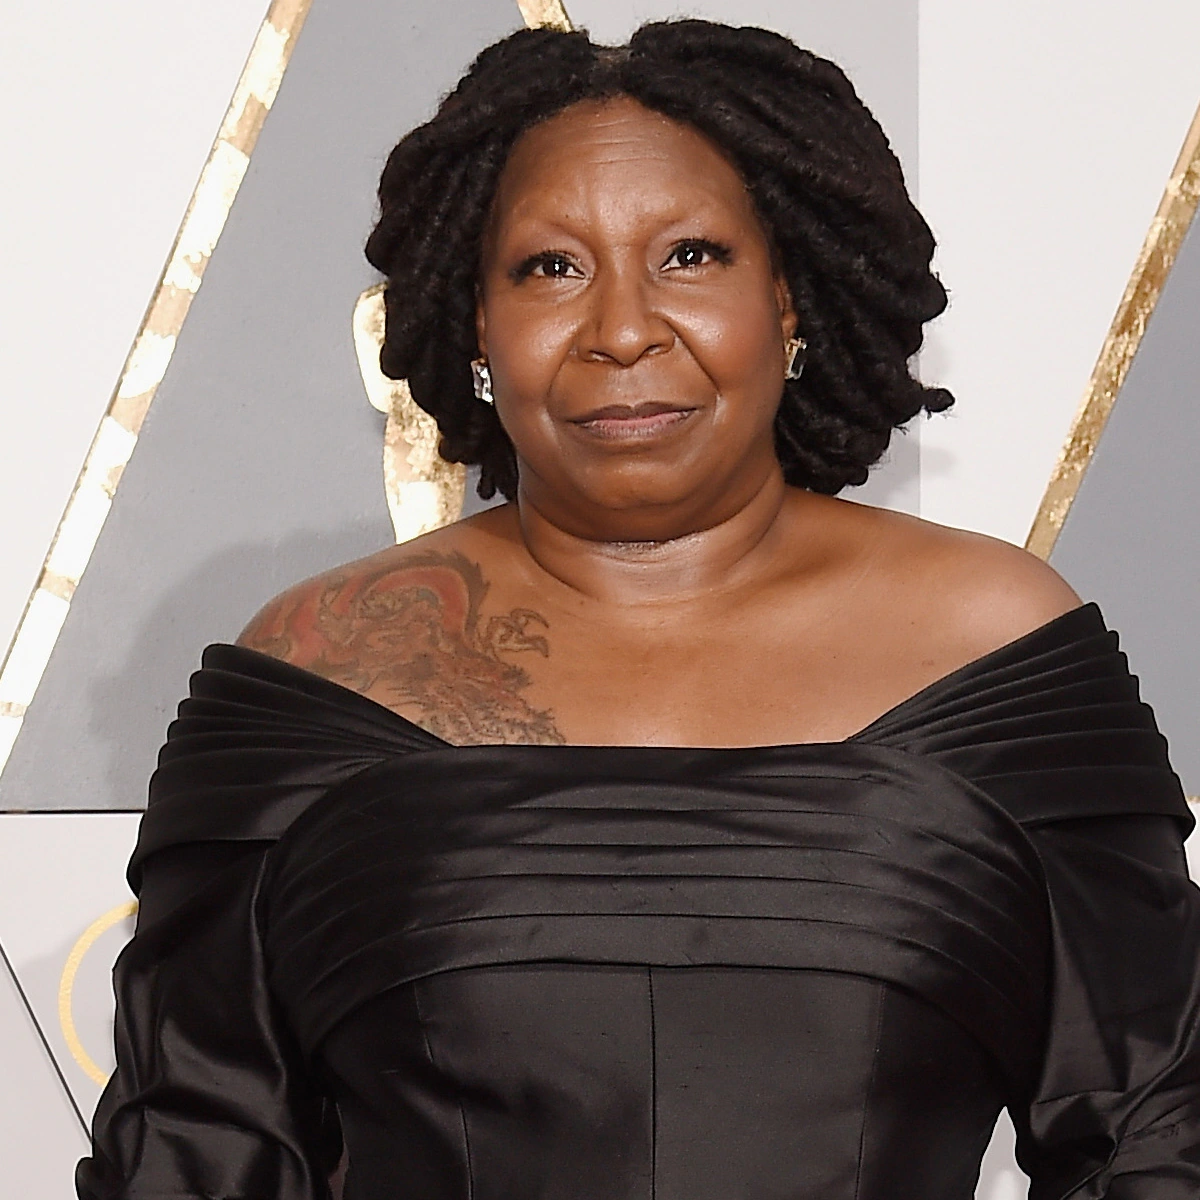 How did Whoopi Goldberg's marriage work out